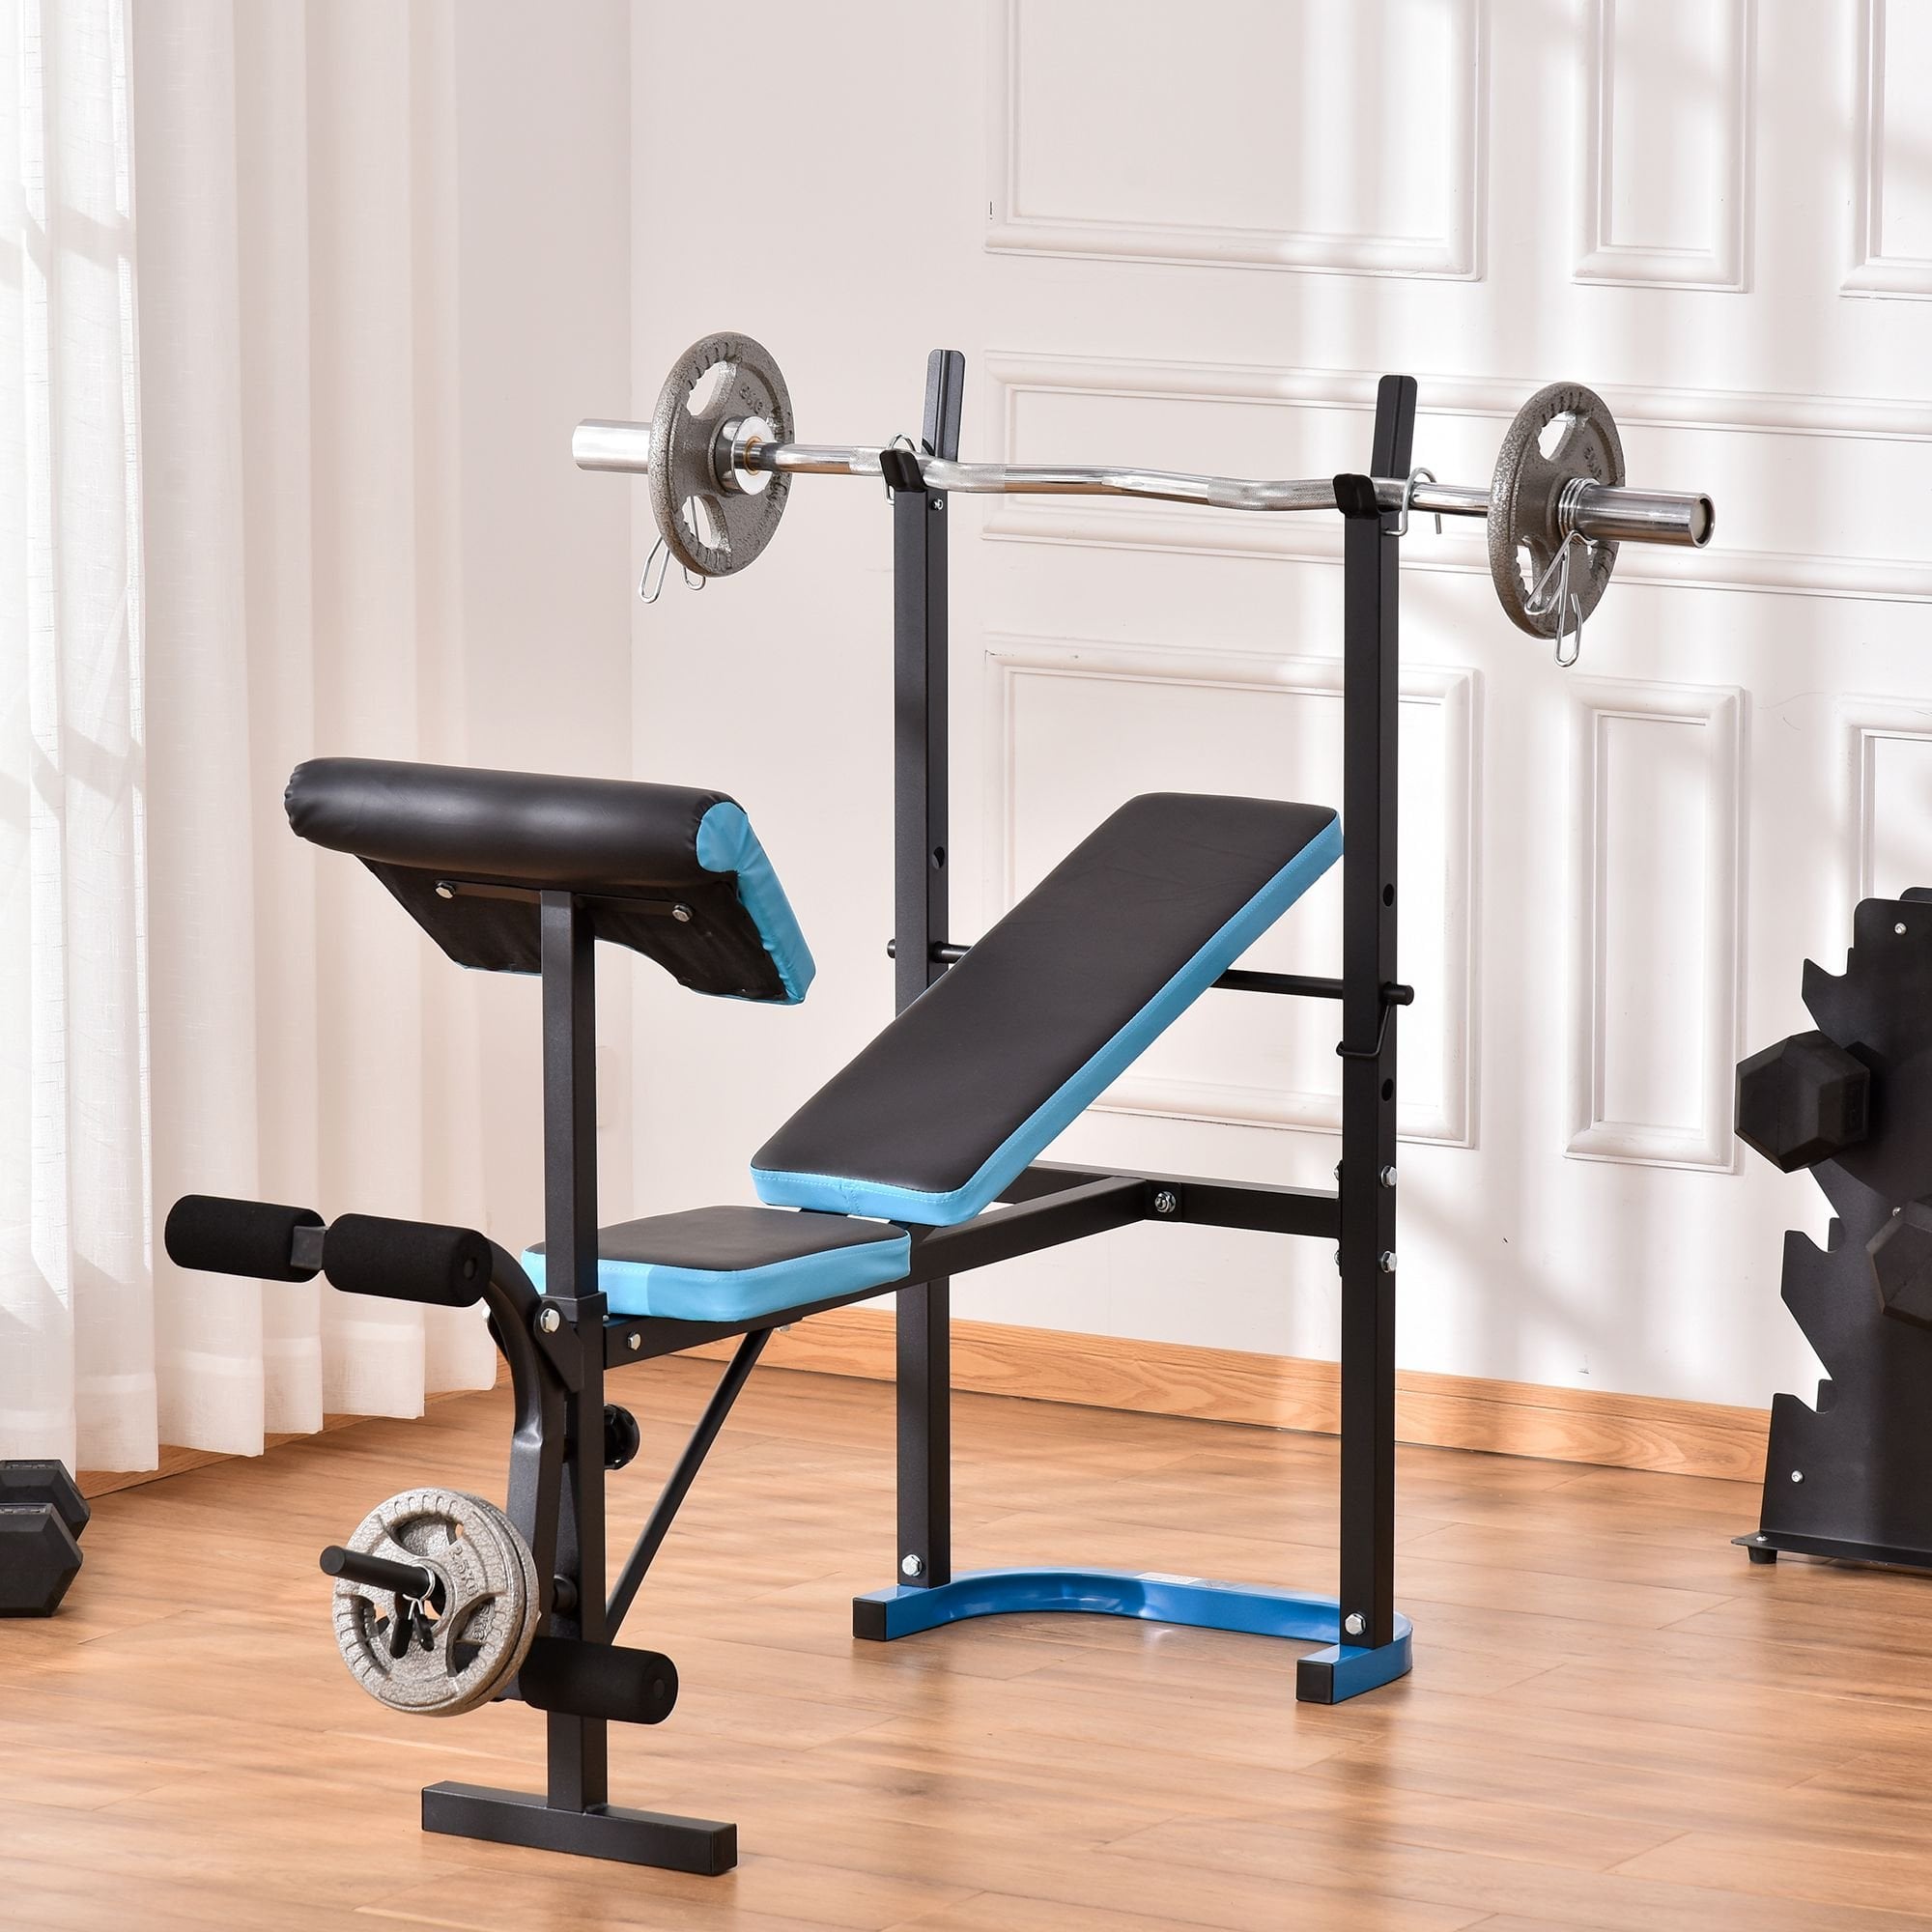 Adjustable Weight Bench with Leg Developer Barbell Rack for Lifting and Strength Training Multifunctional Workout Station for Home Gym - MAXFIT  | TJ